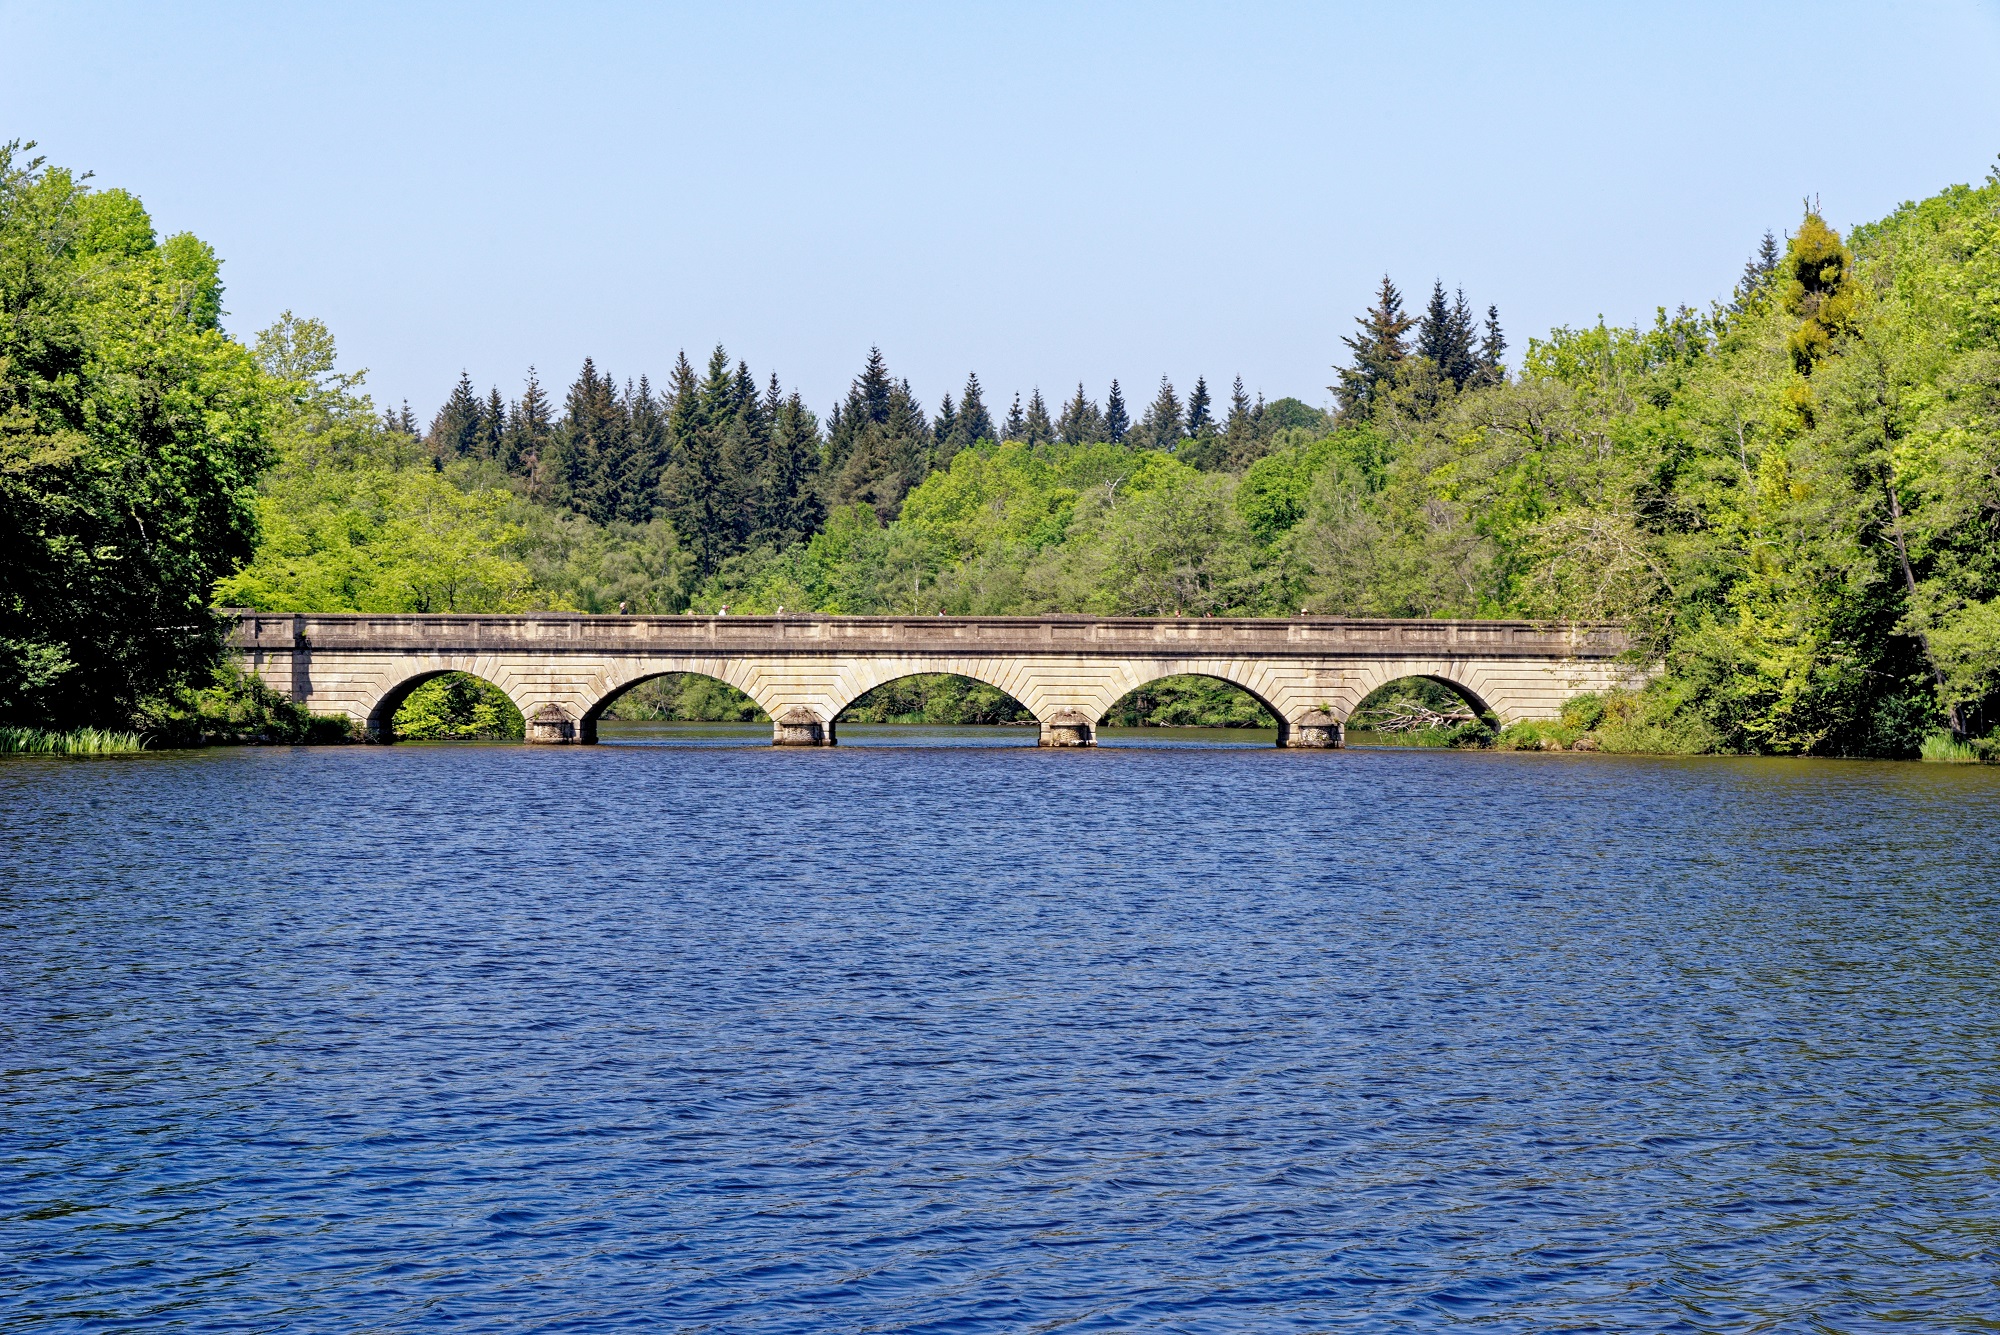 Five Arch Bridge at Virginia Water Lake with trees in the background.